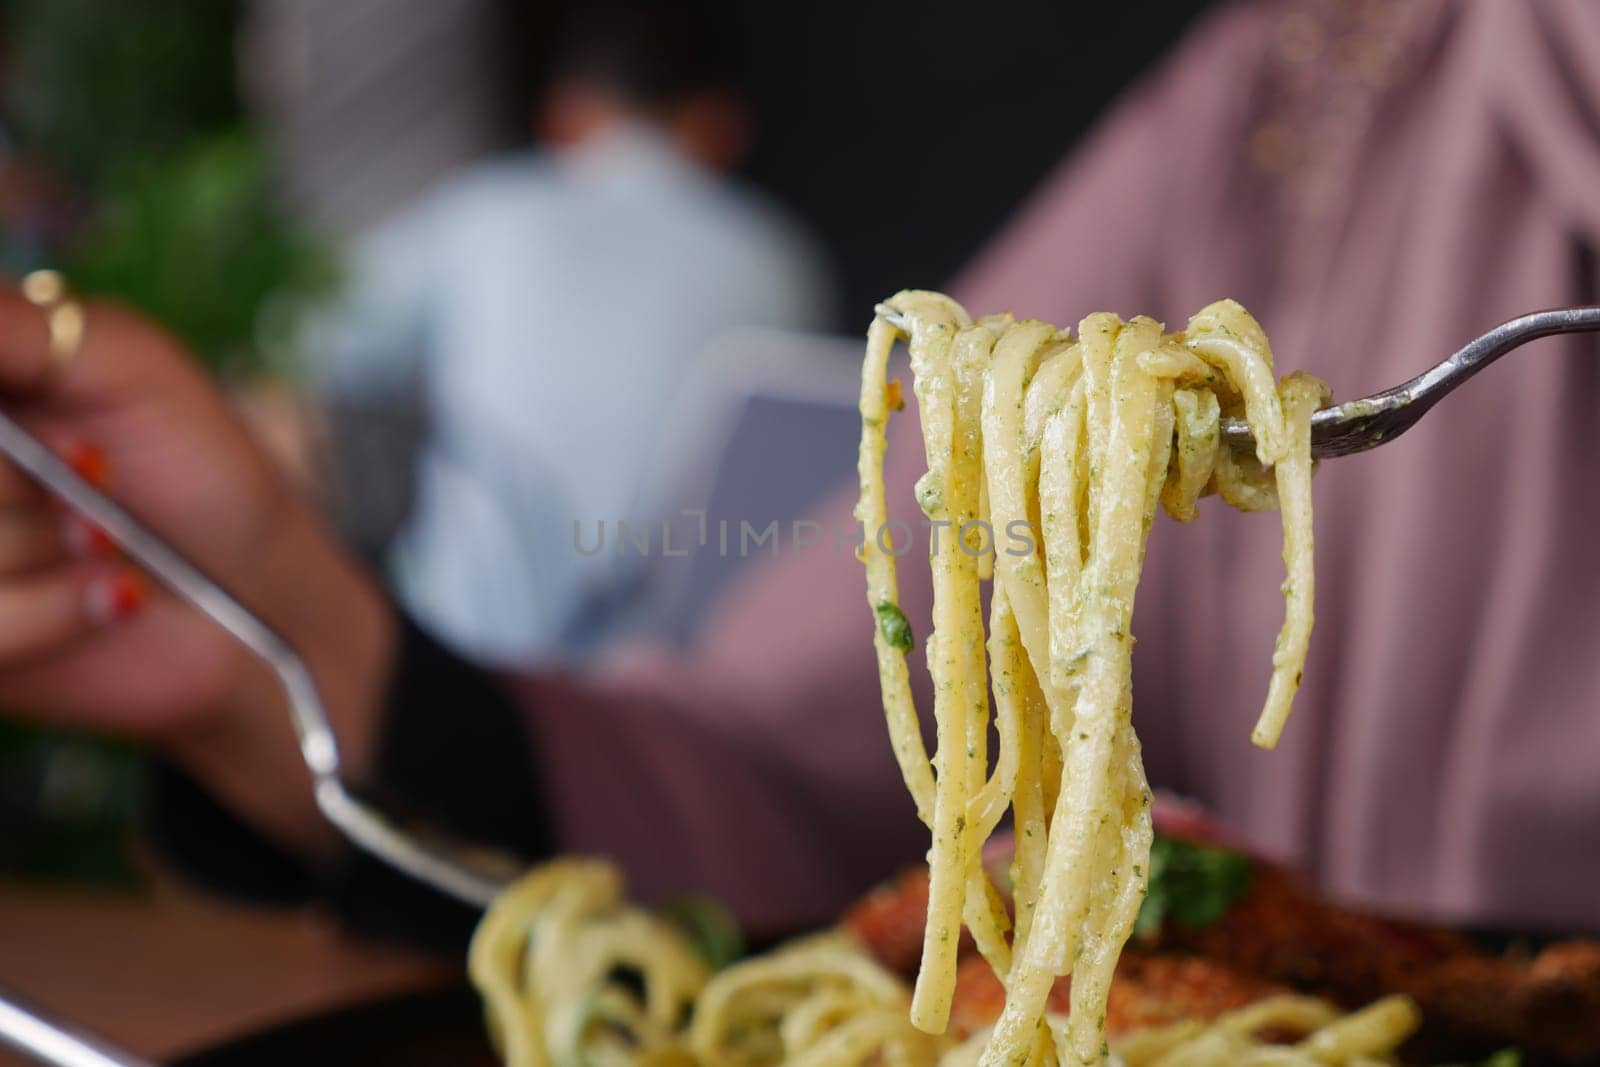 CloseUp of a Fork with Spaghetti in a Charming Italian Restaurant Setting.